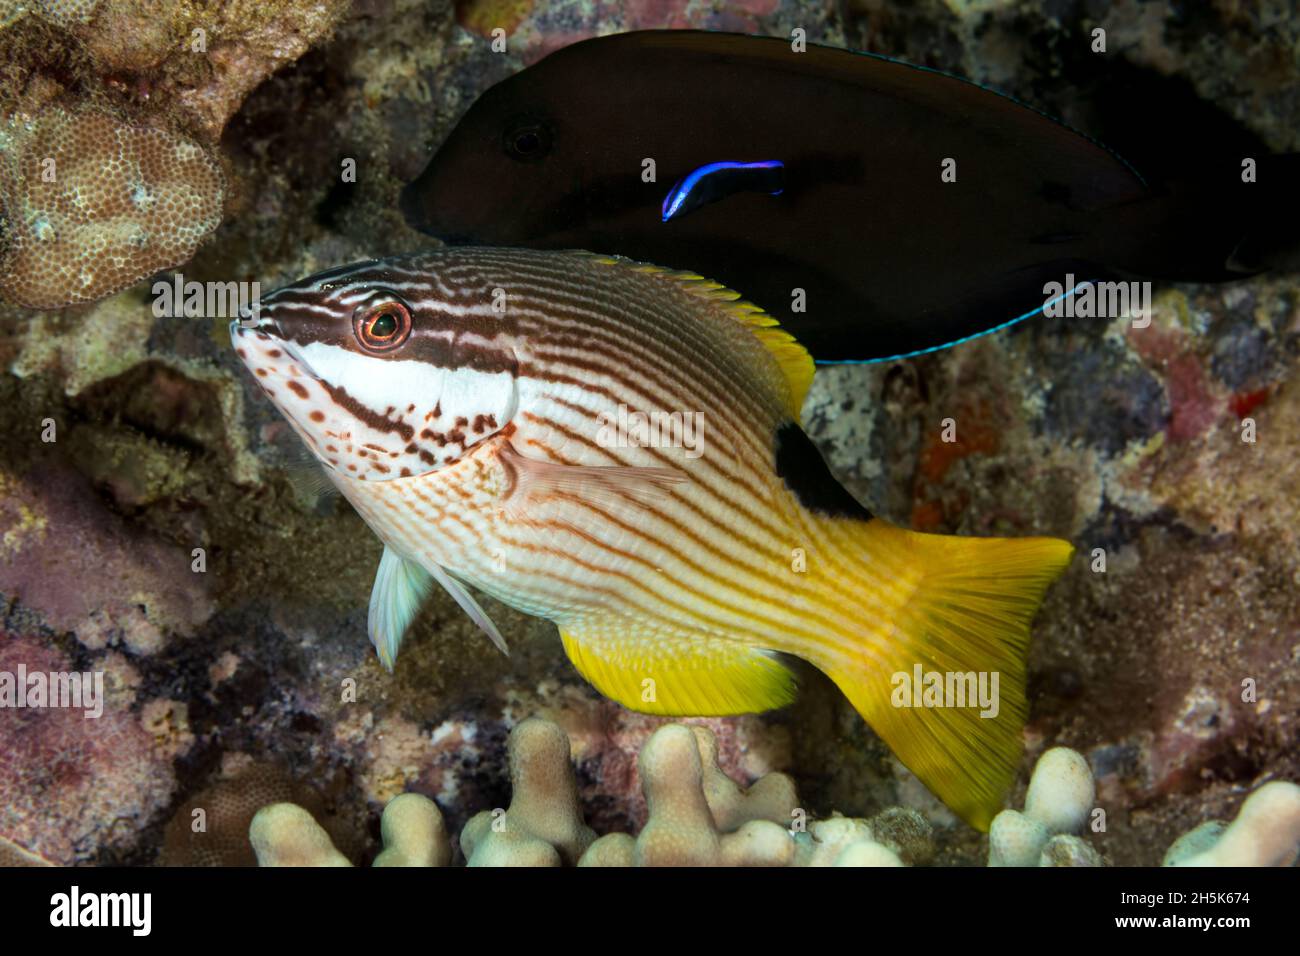 Rarely seen mature endemic female hogfish (Bodianus albotaeniatus) with endemic Hawaiian Cleaner Wrasse (Labroides phthirophagus) Stock Photo